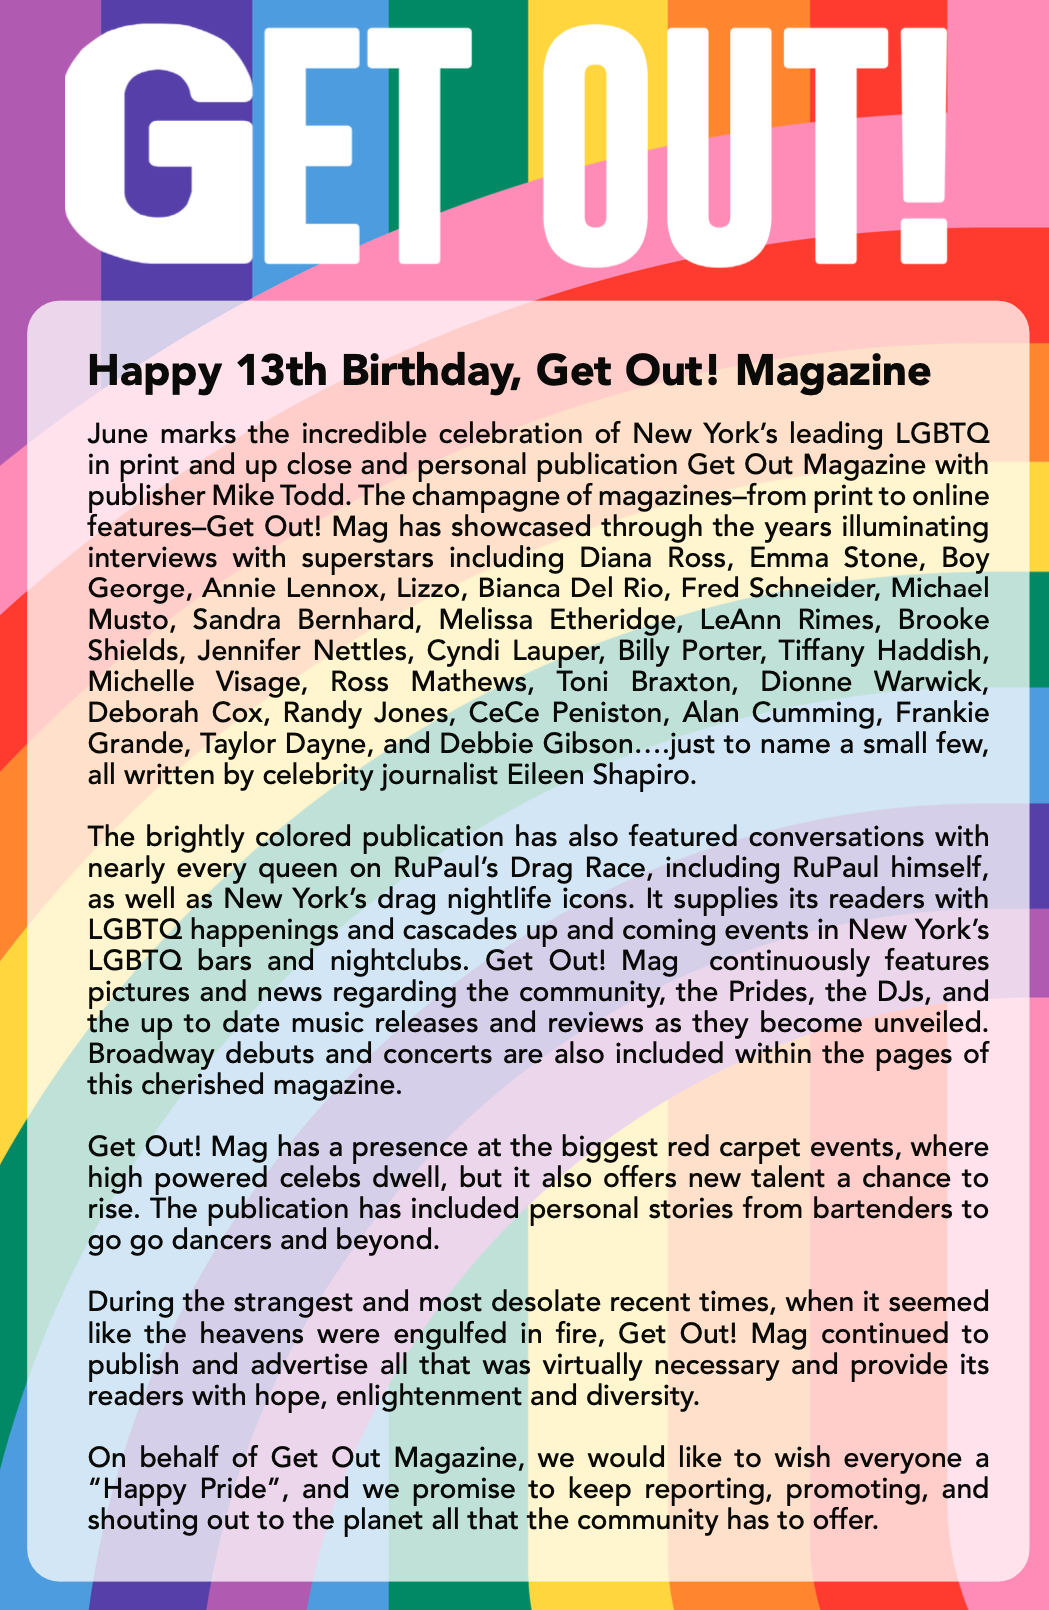  Happy 13th Birthday, Get Out! Magazine